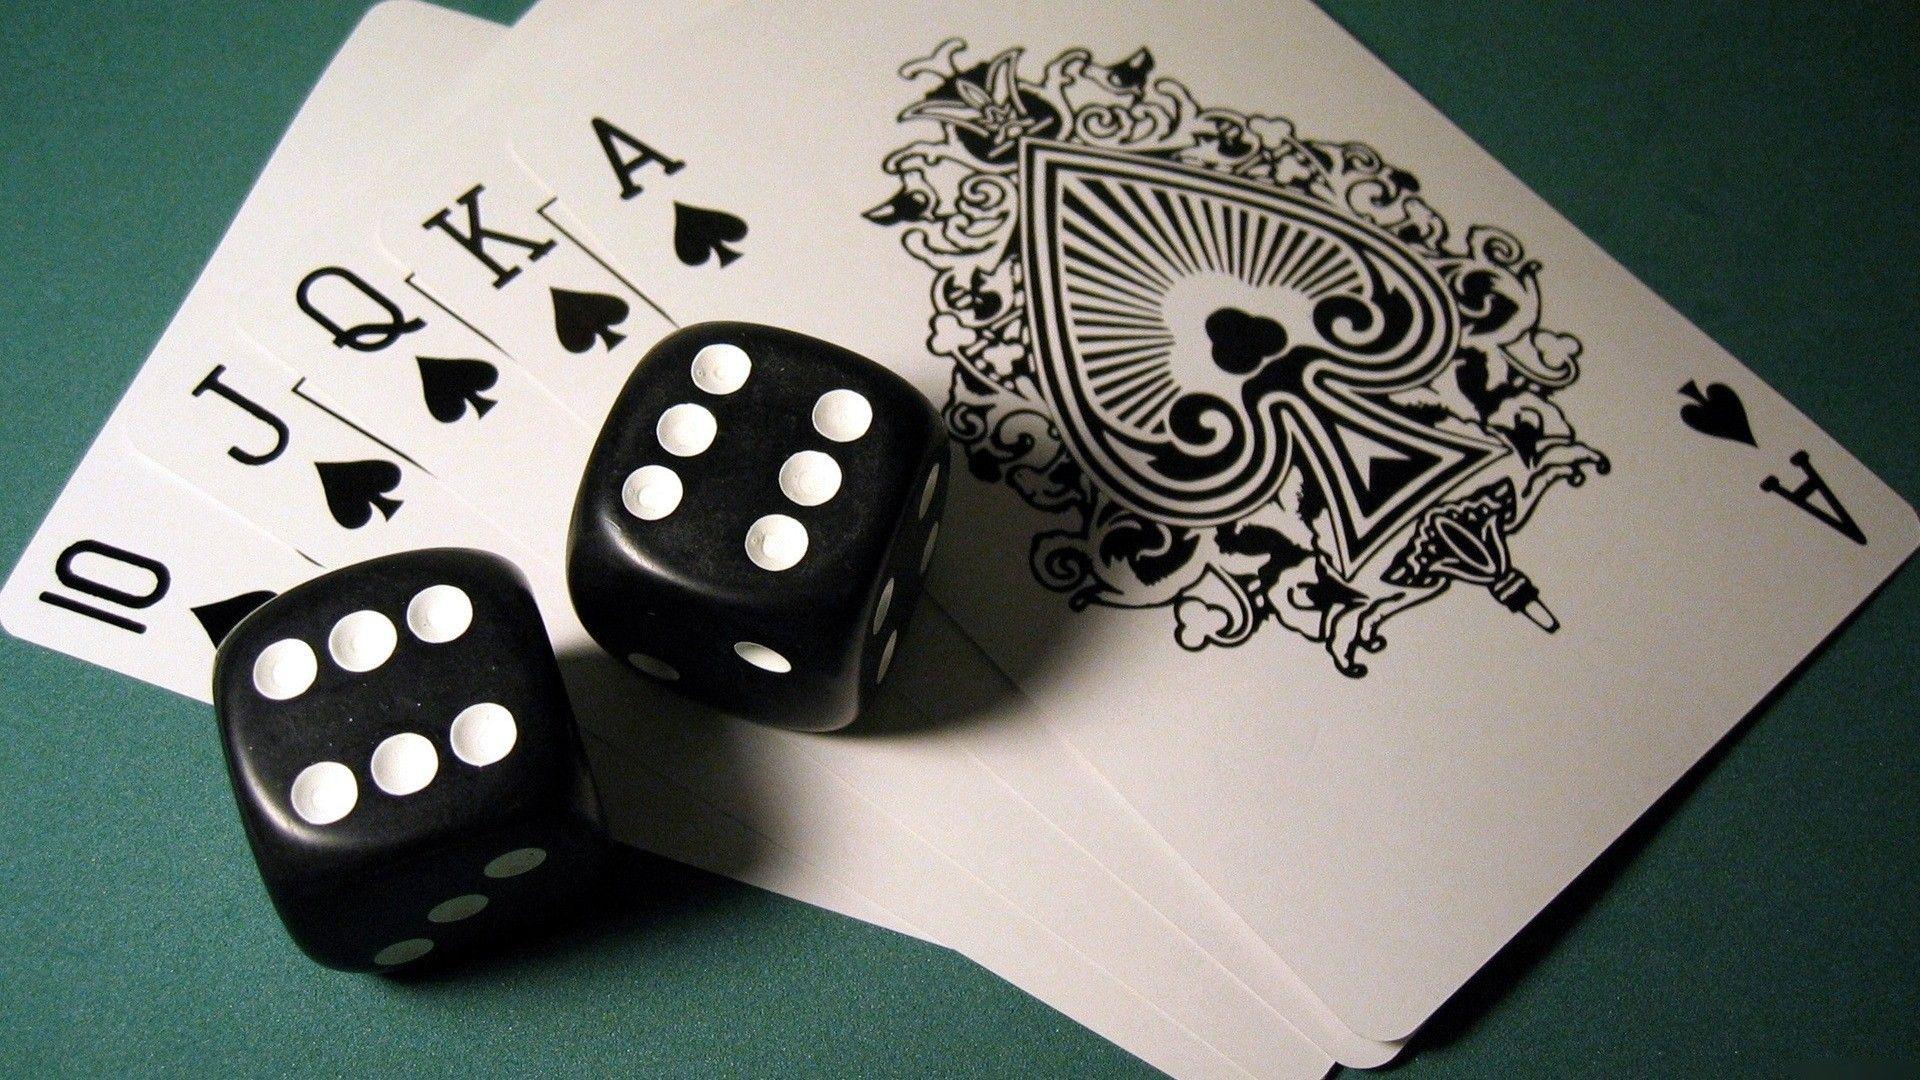 Love Playing Cards And Dice Wallpaper HD Wallpaper. ART